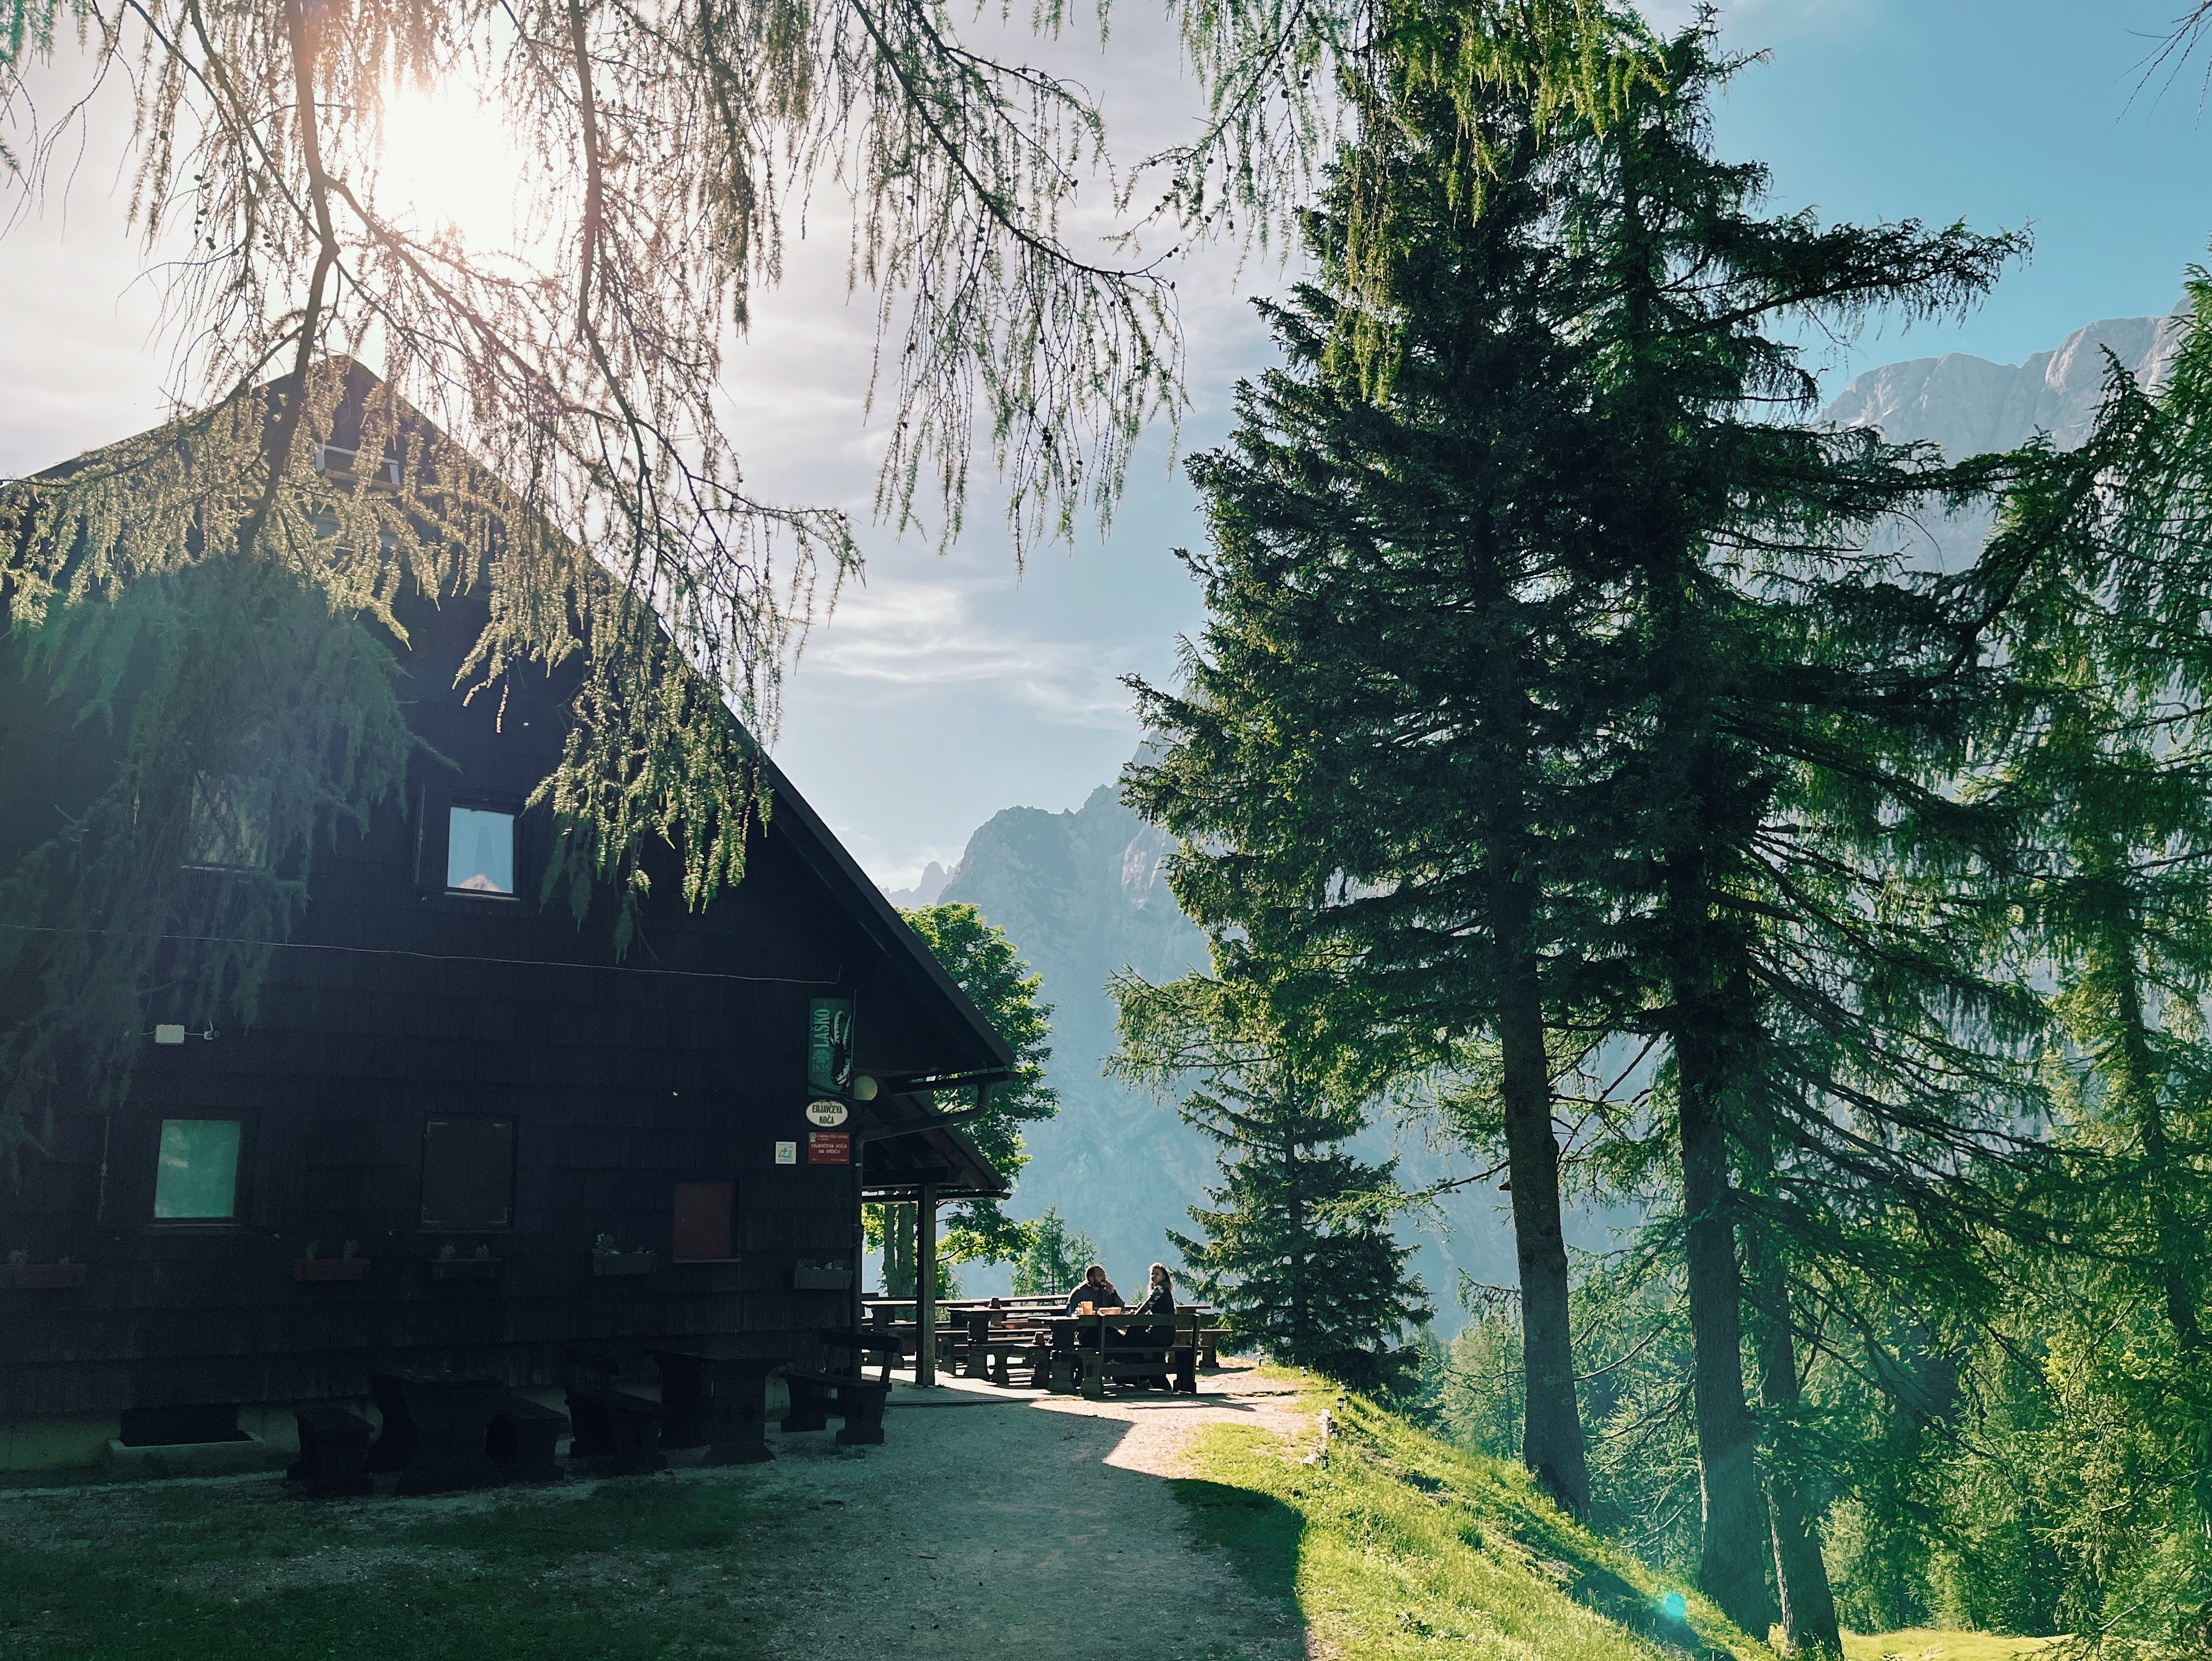 View of mountain hut in Slovenia while hiking the Alpe Adria Trail